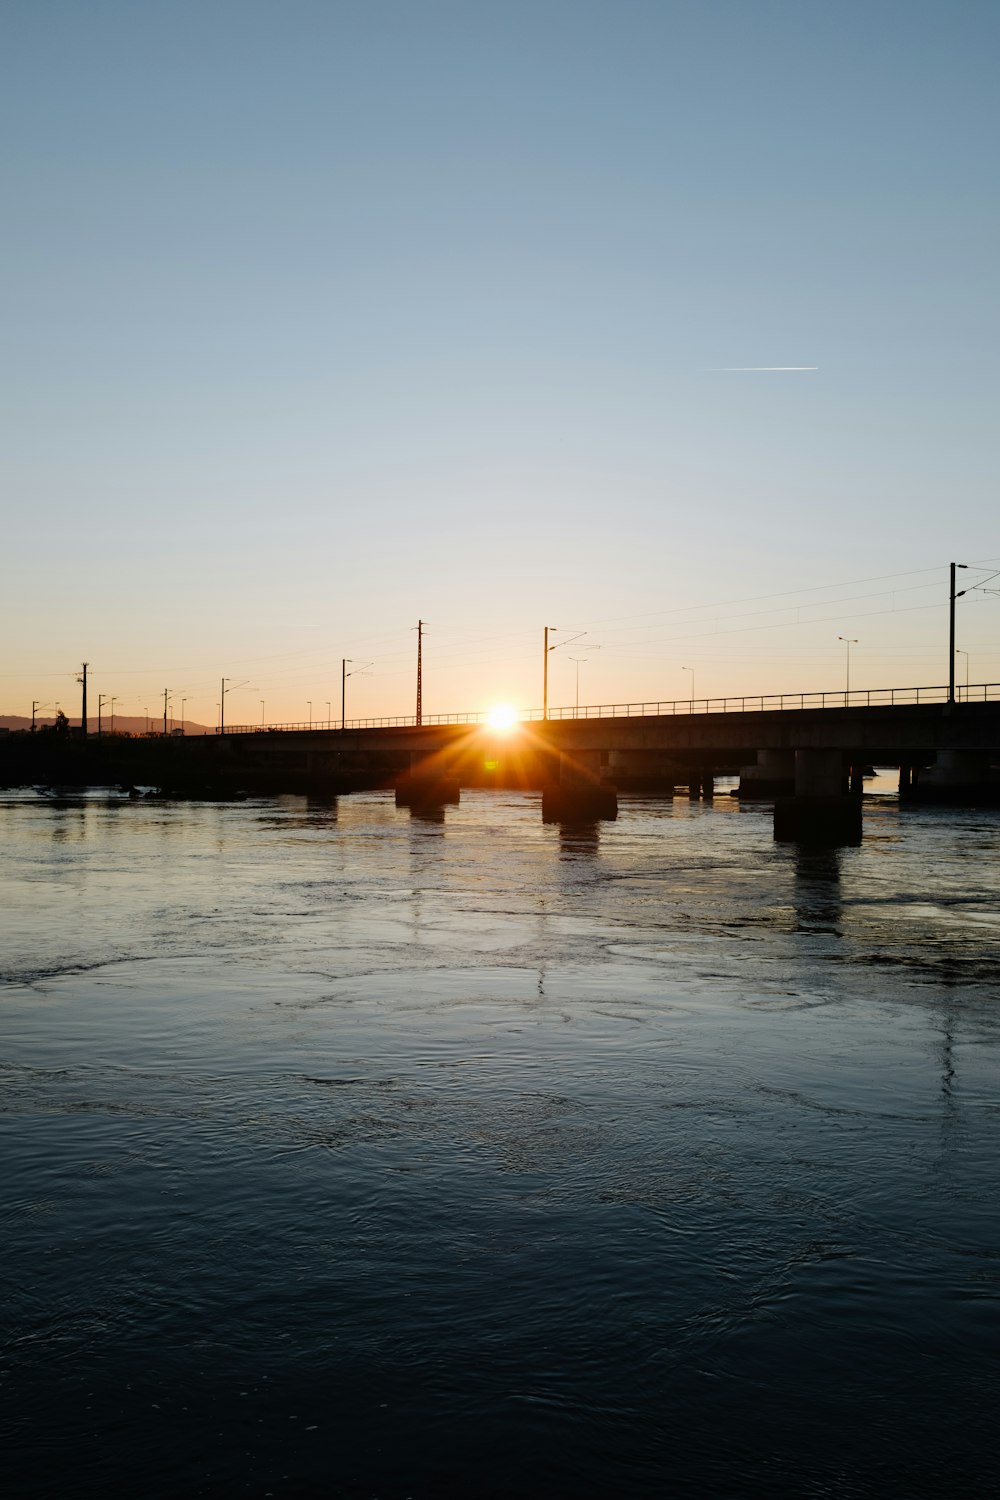 the sun is setting on a bridge over a body of water